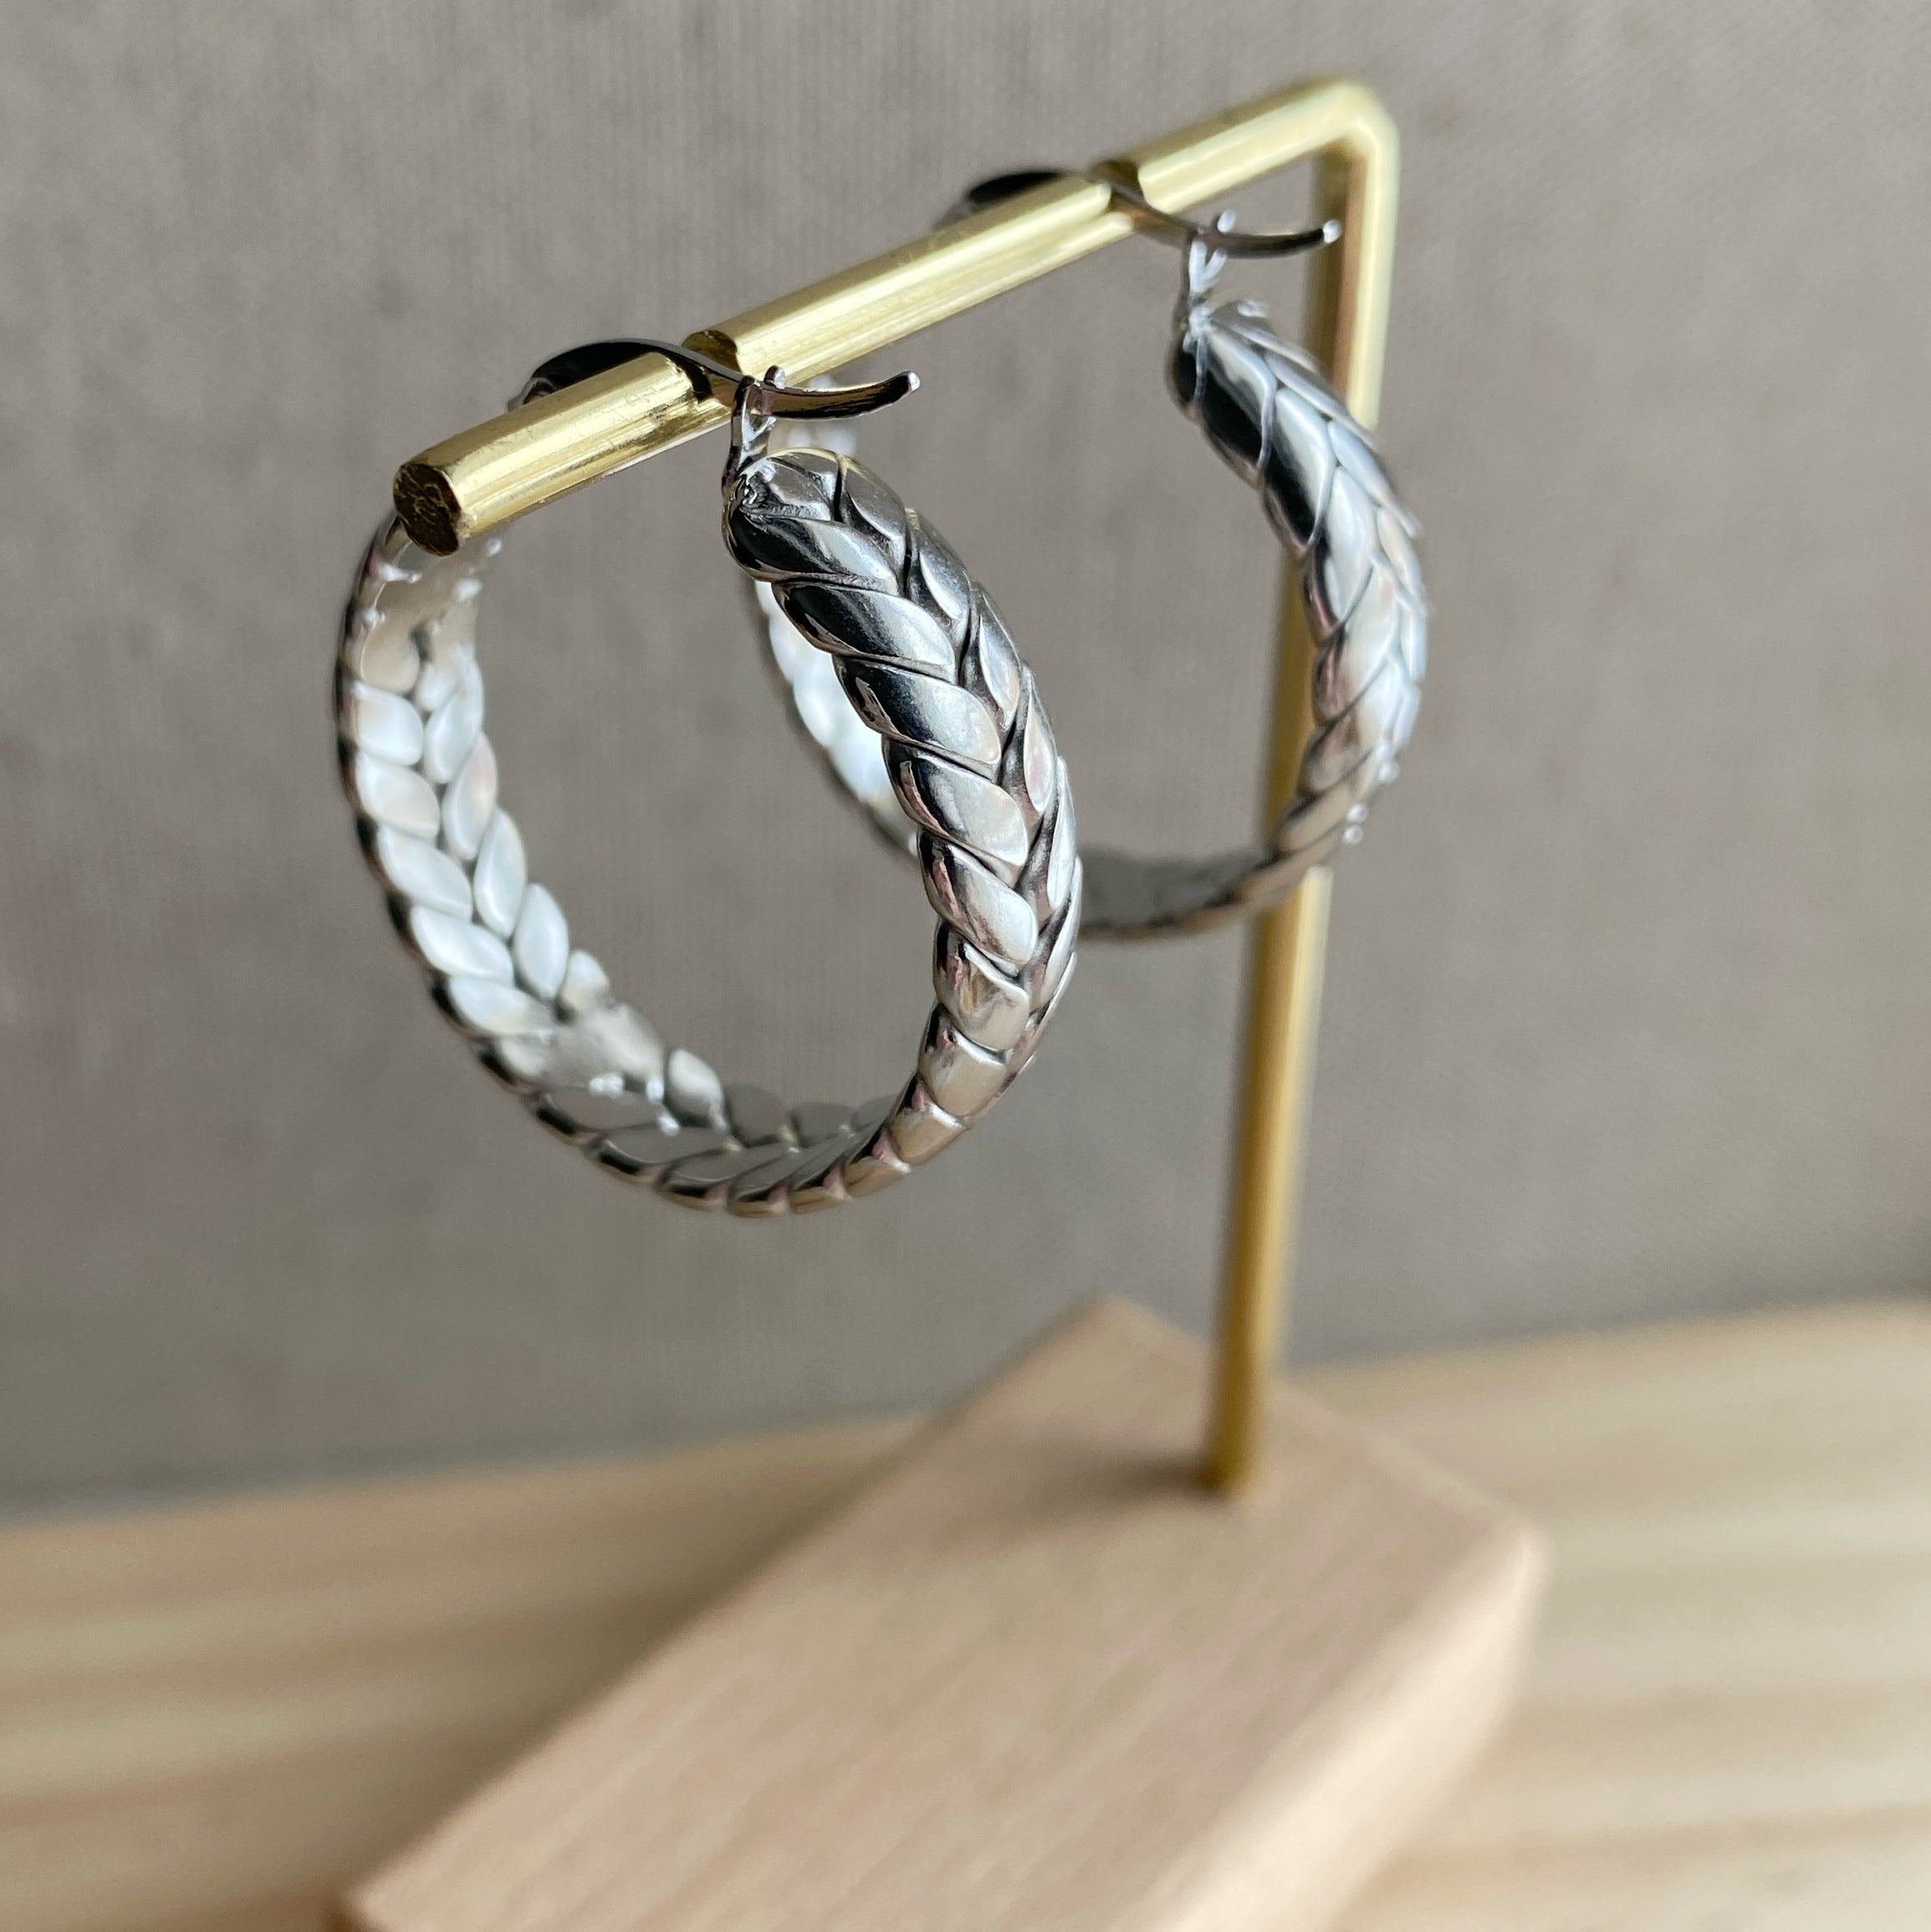 Success earrings silver gold plated braided hoops 2.5 cm - Oxette